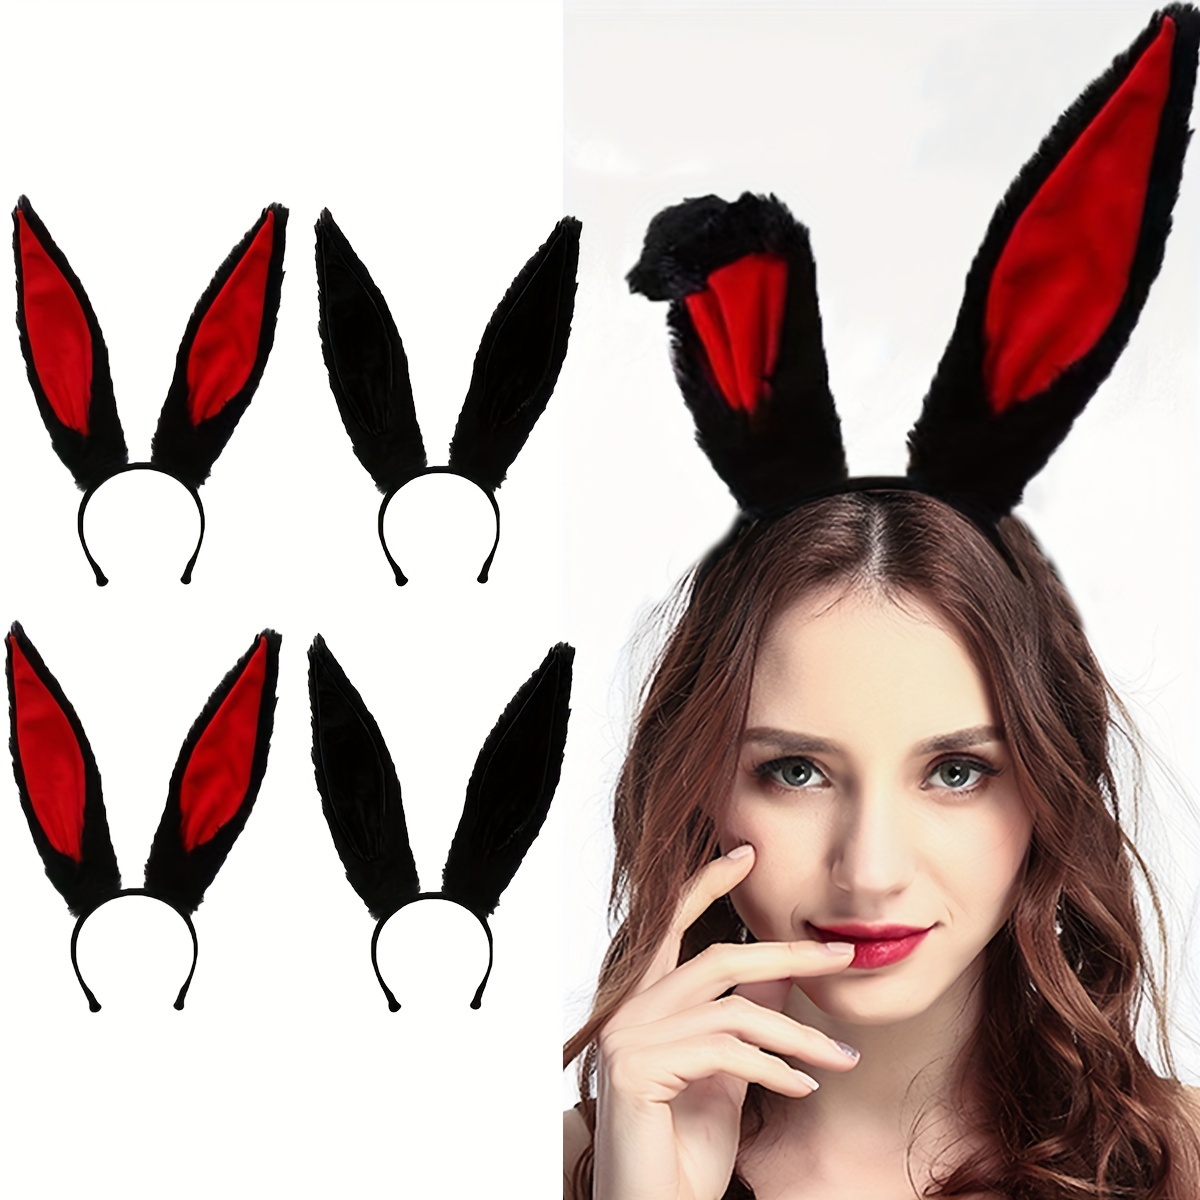 

Easter Plush Rabbit Ears Hair Band Lovely Non Slip Head Band Trendy Hair Accessories For Women And Daily Use Daily Wear